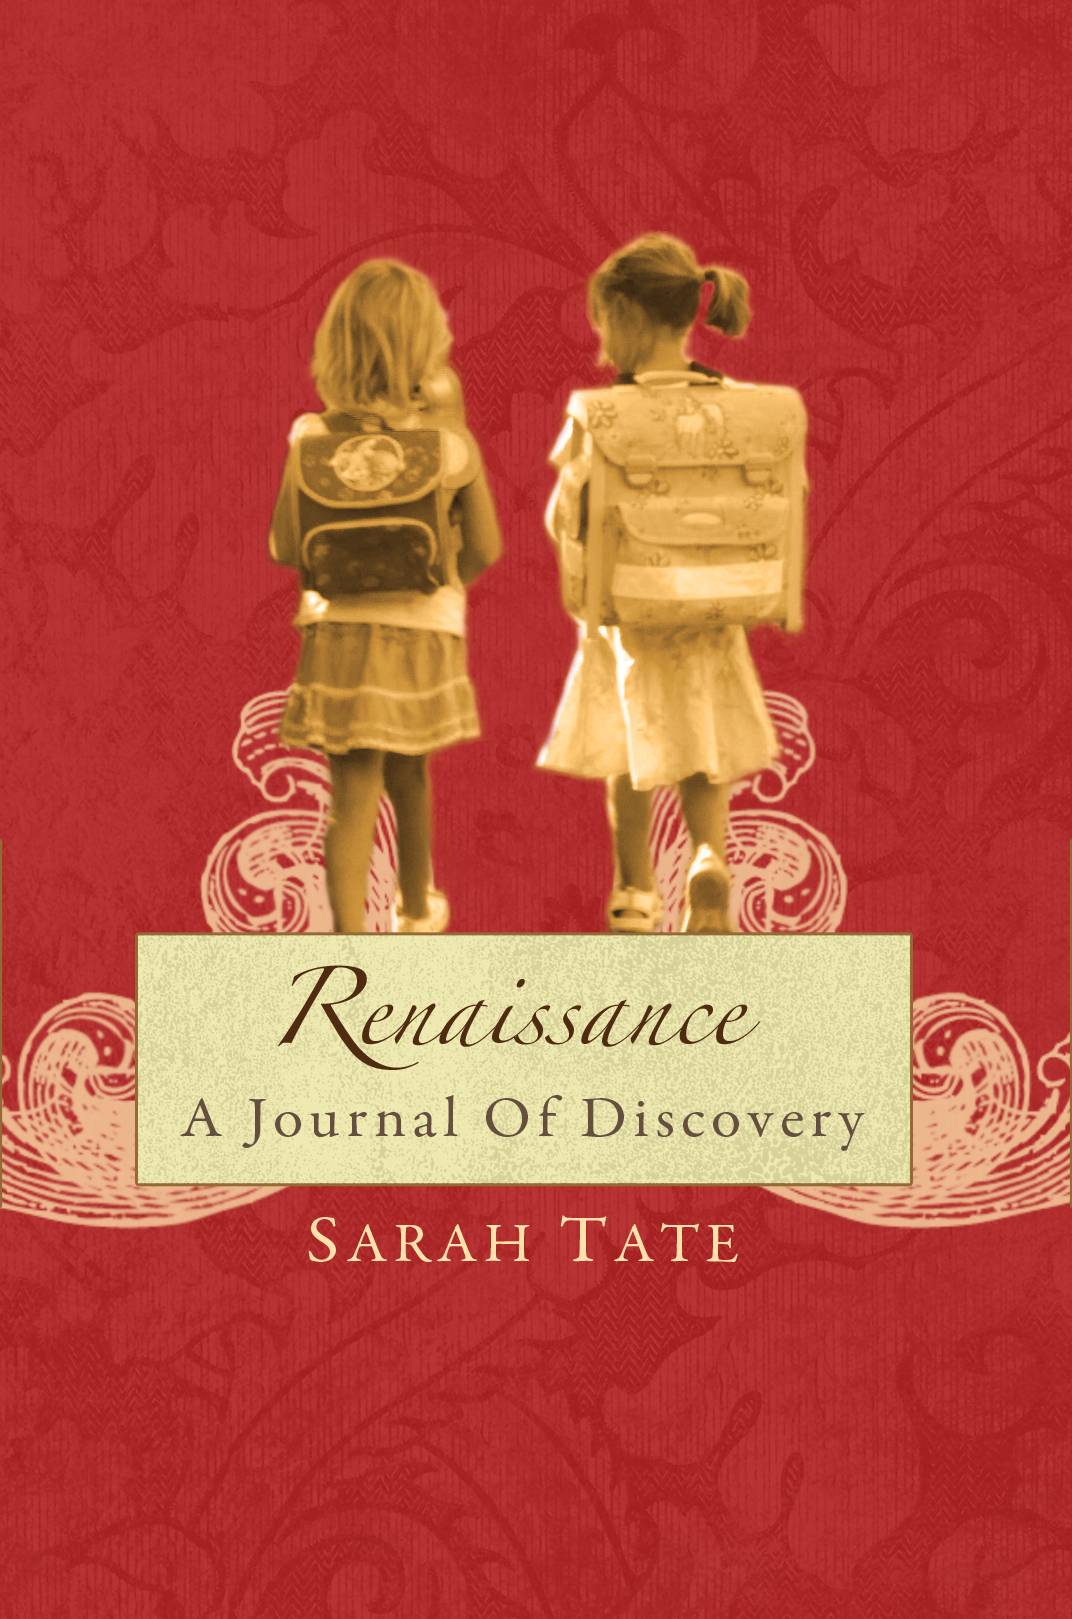 Renaissance - A Journal of Discovery